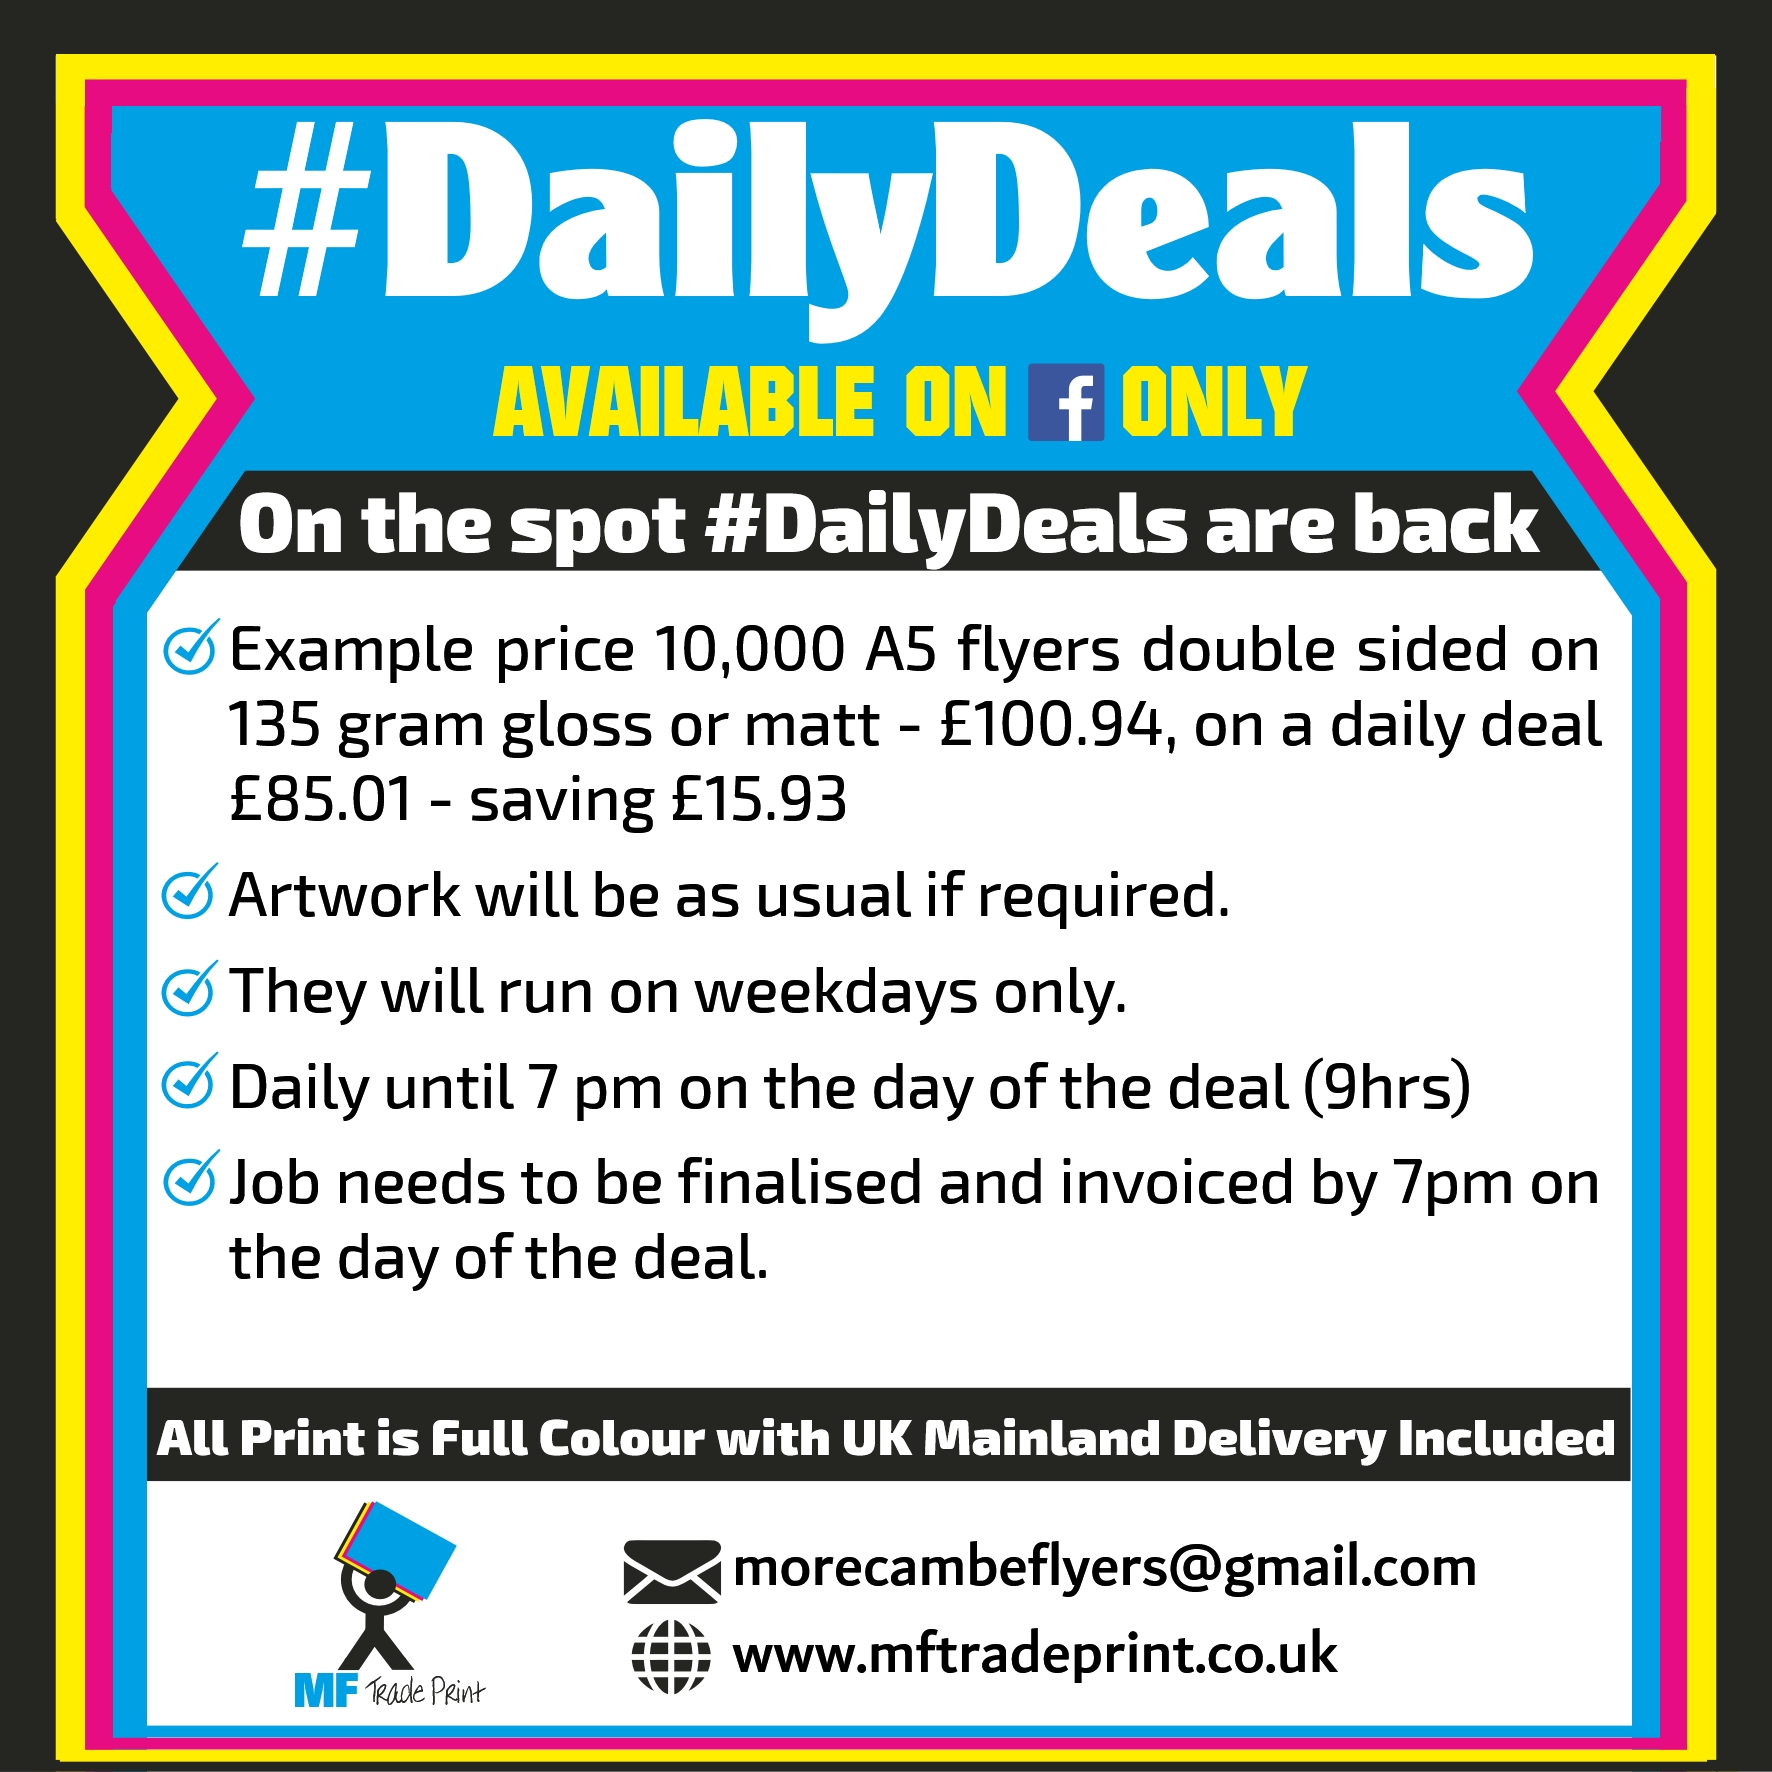 #dailydeals ARE BACK